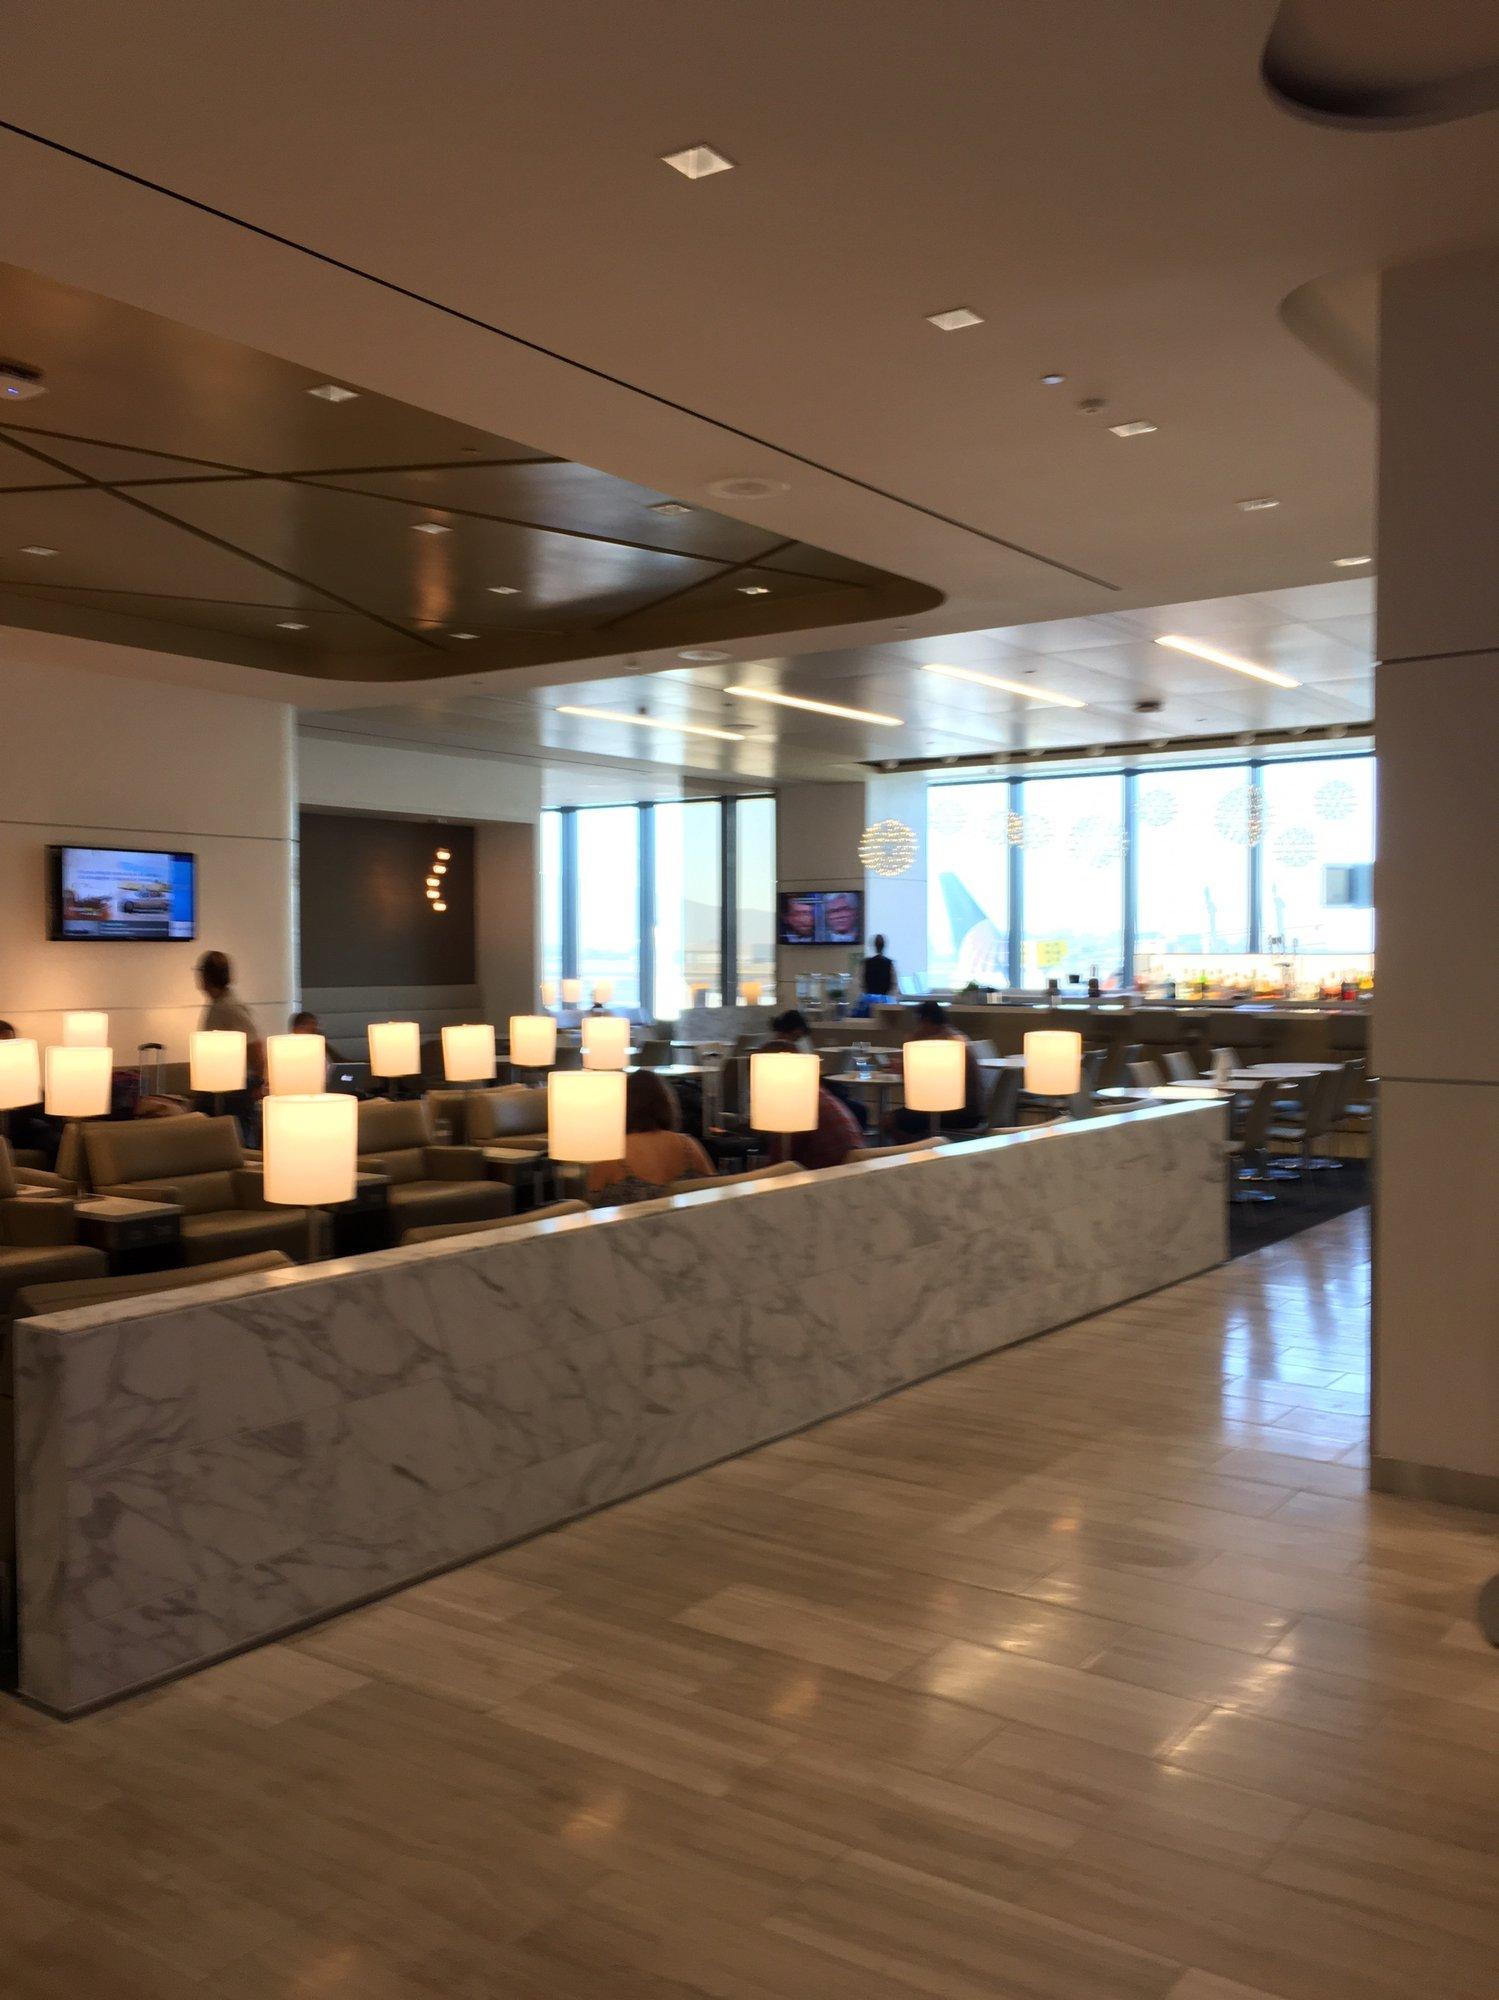 United Airlines United Club image 34 of 43